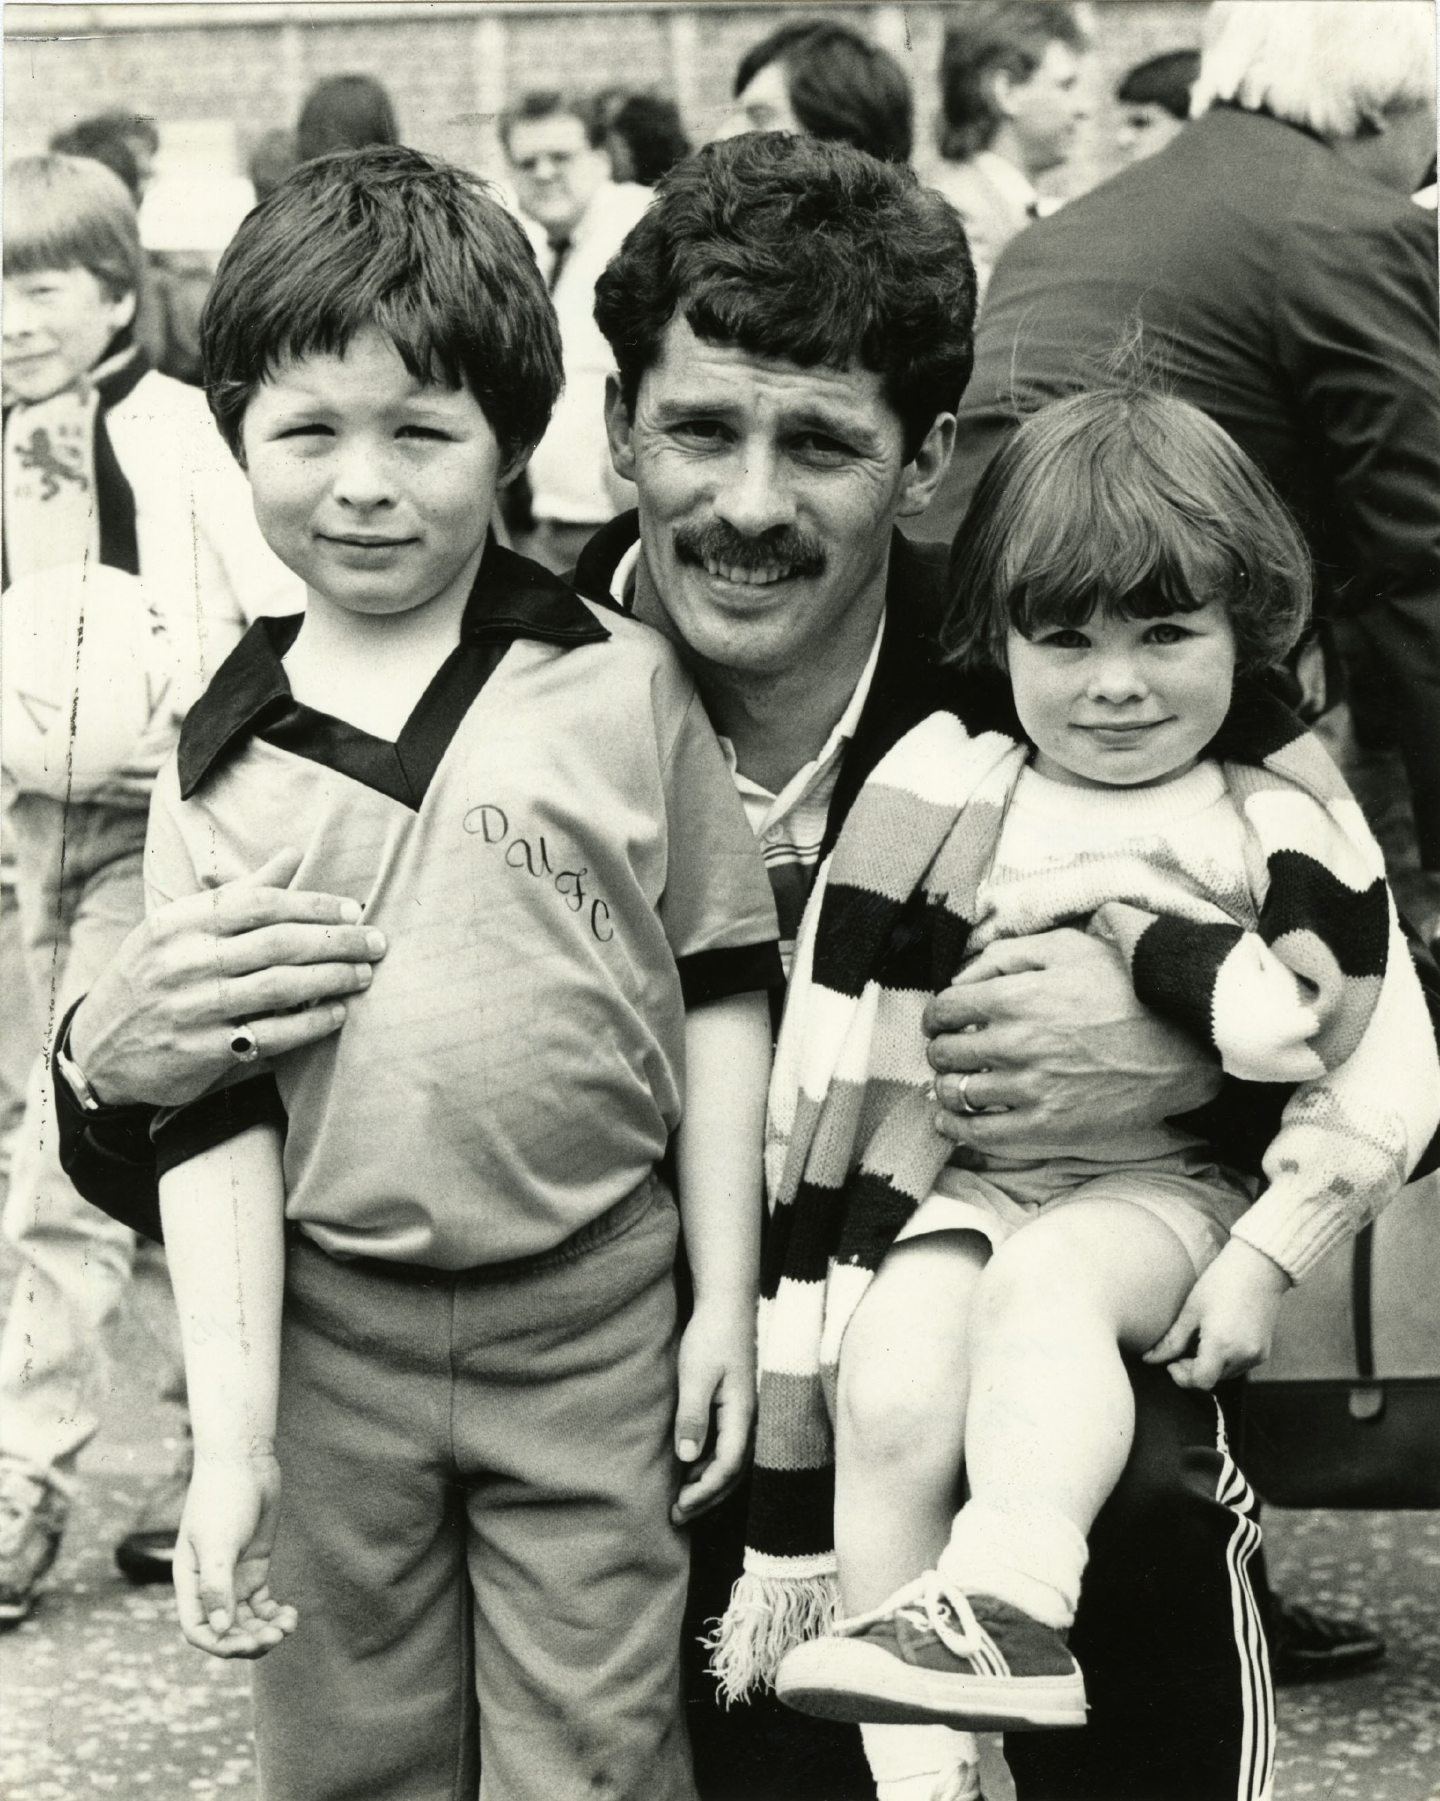 Holt with his son John and daughter Sarah following the second-leg win against Borussia Mönchengladbach in 1987.